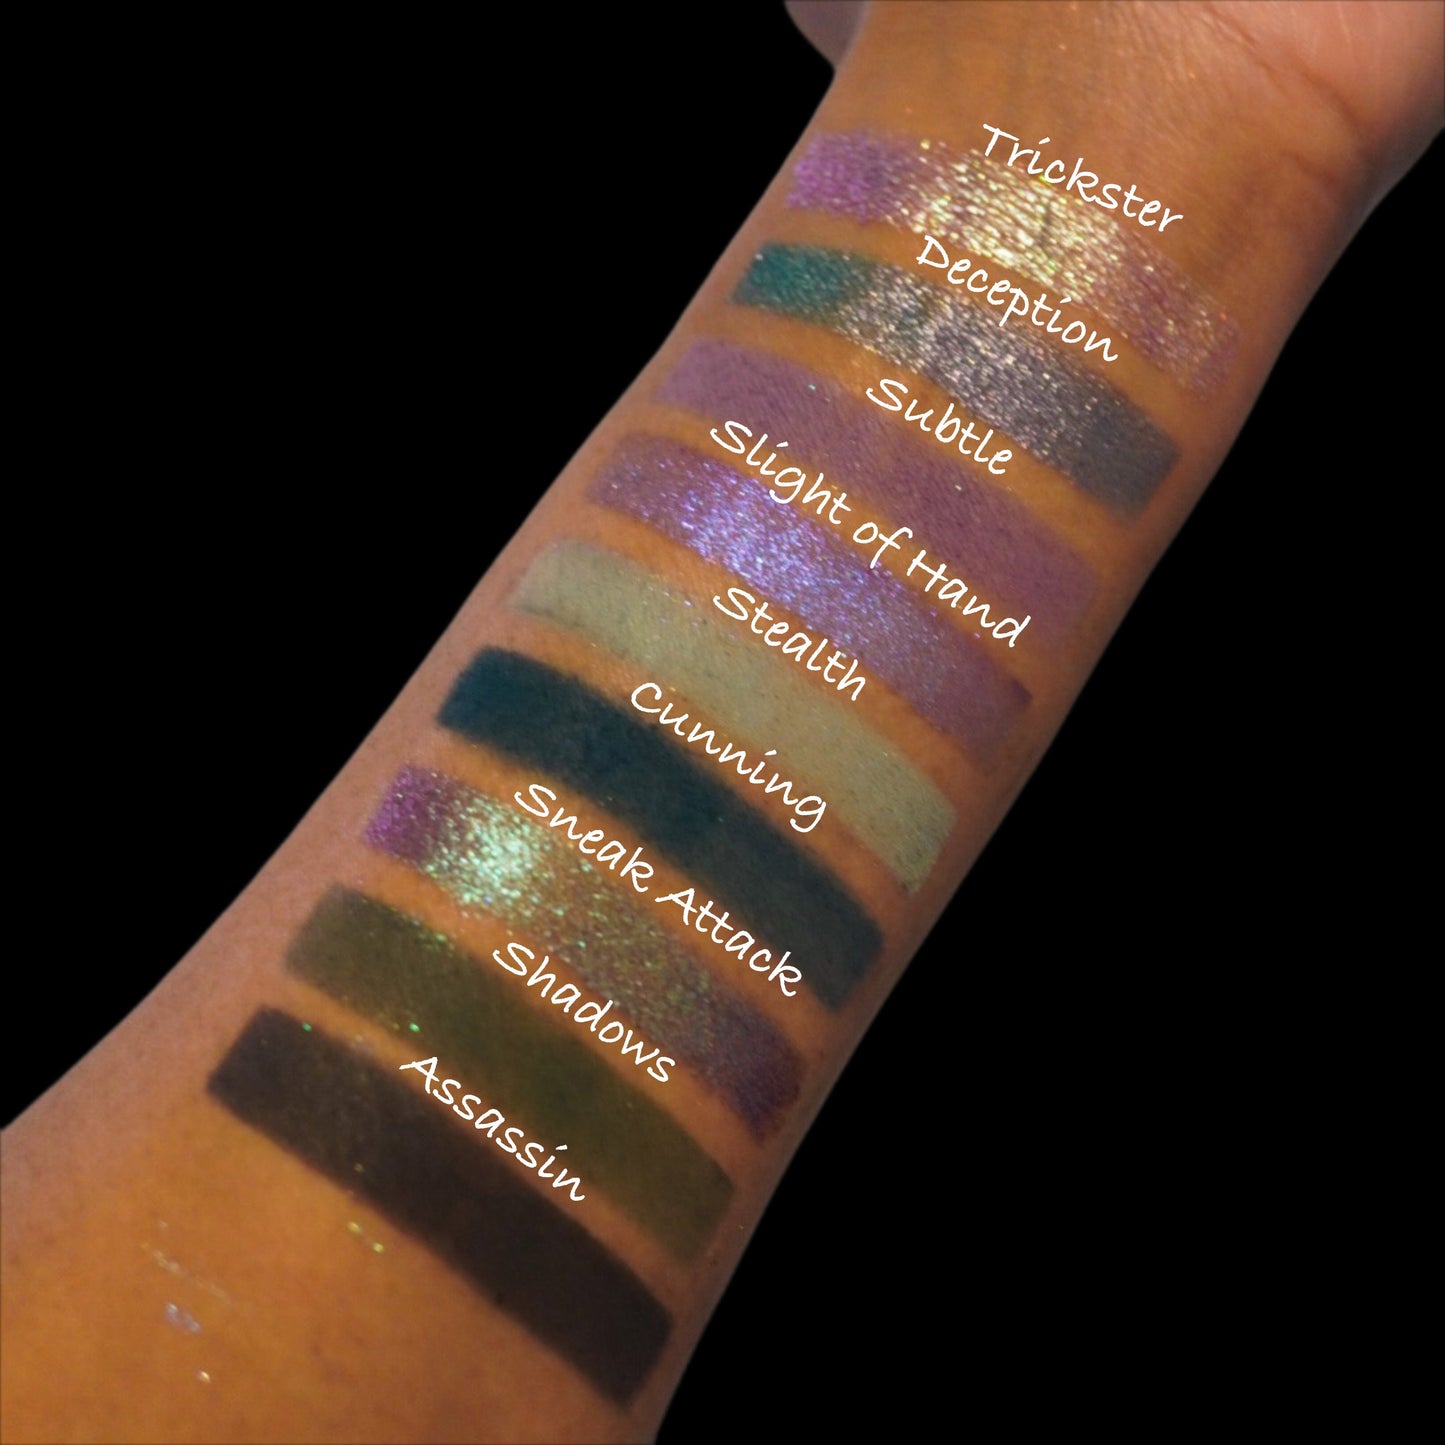 Rogue eyeshadow palette by Fantasy Cosmetica swatches